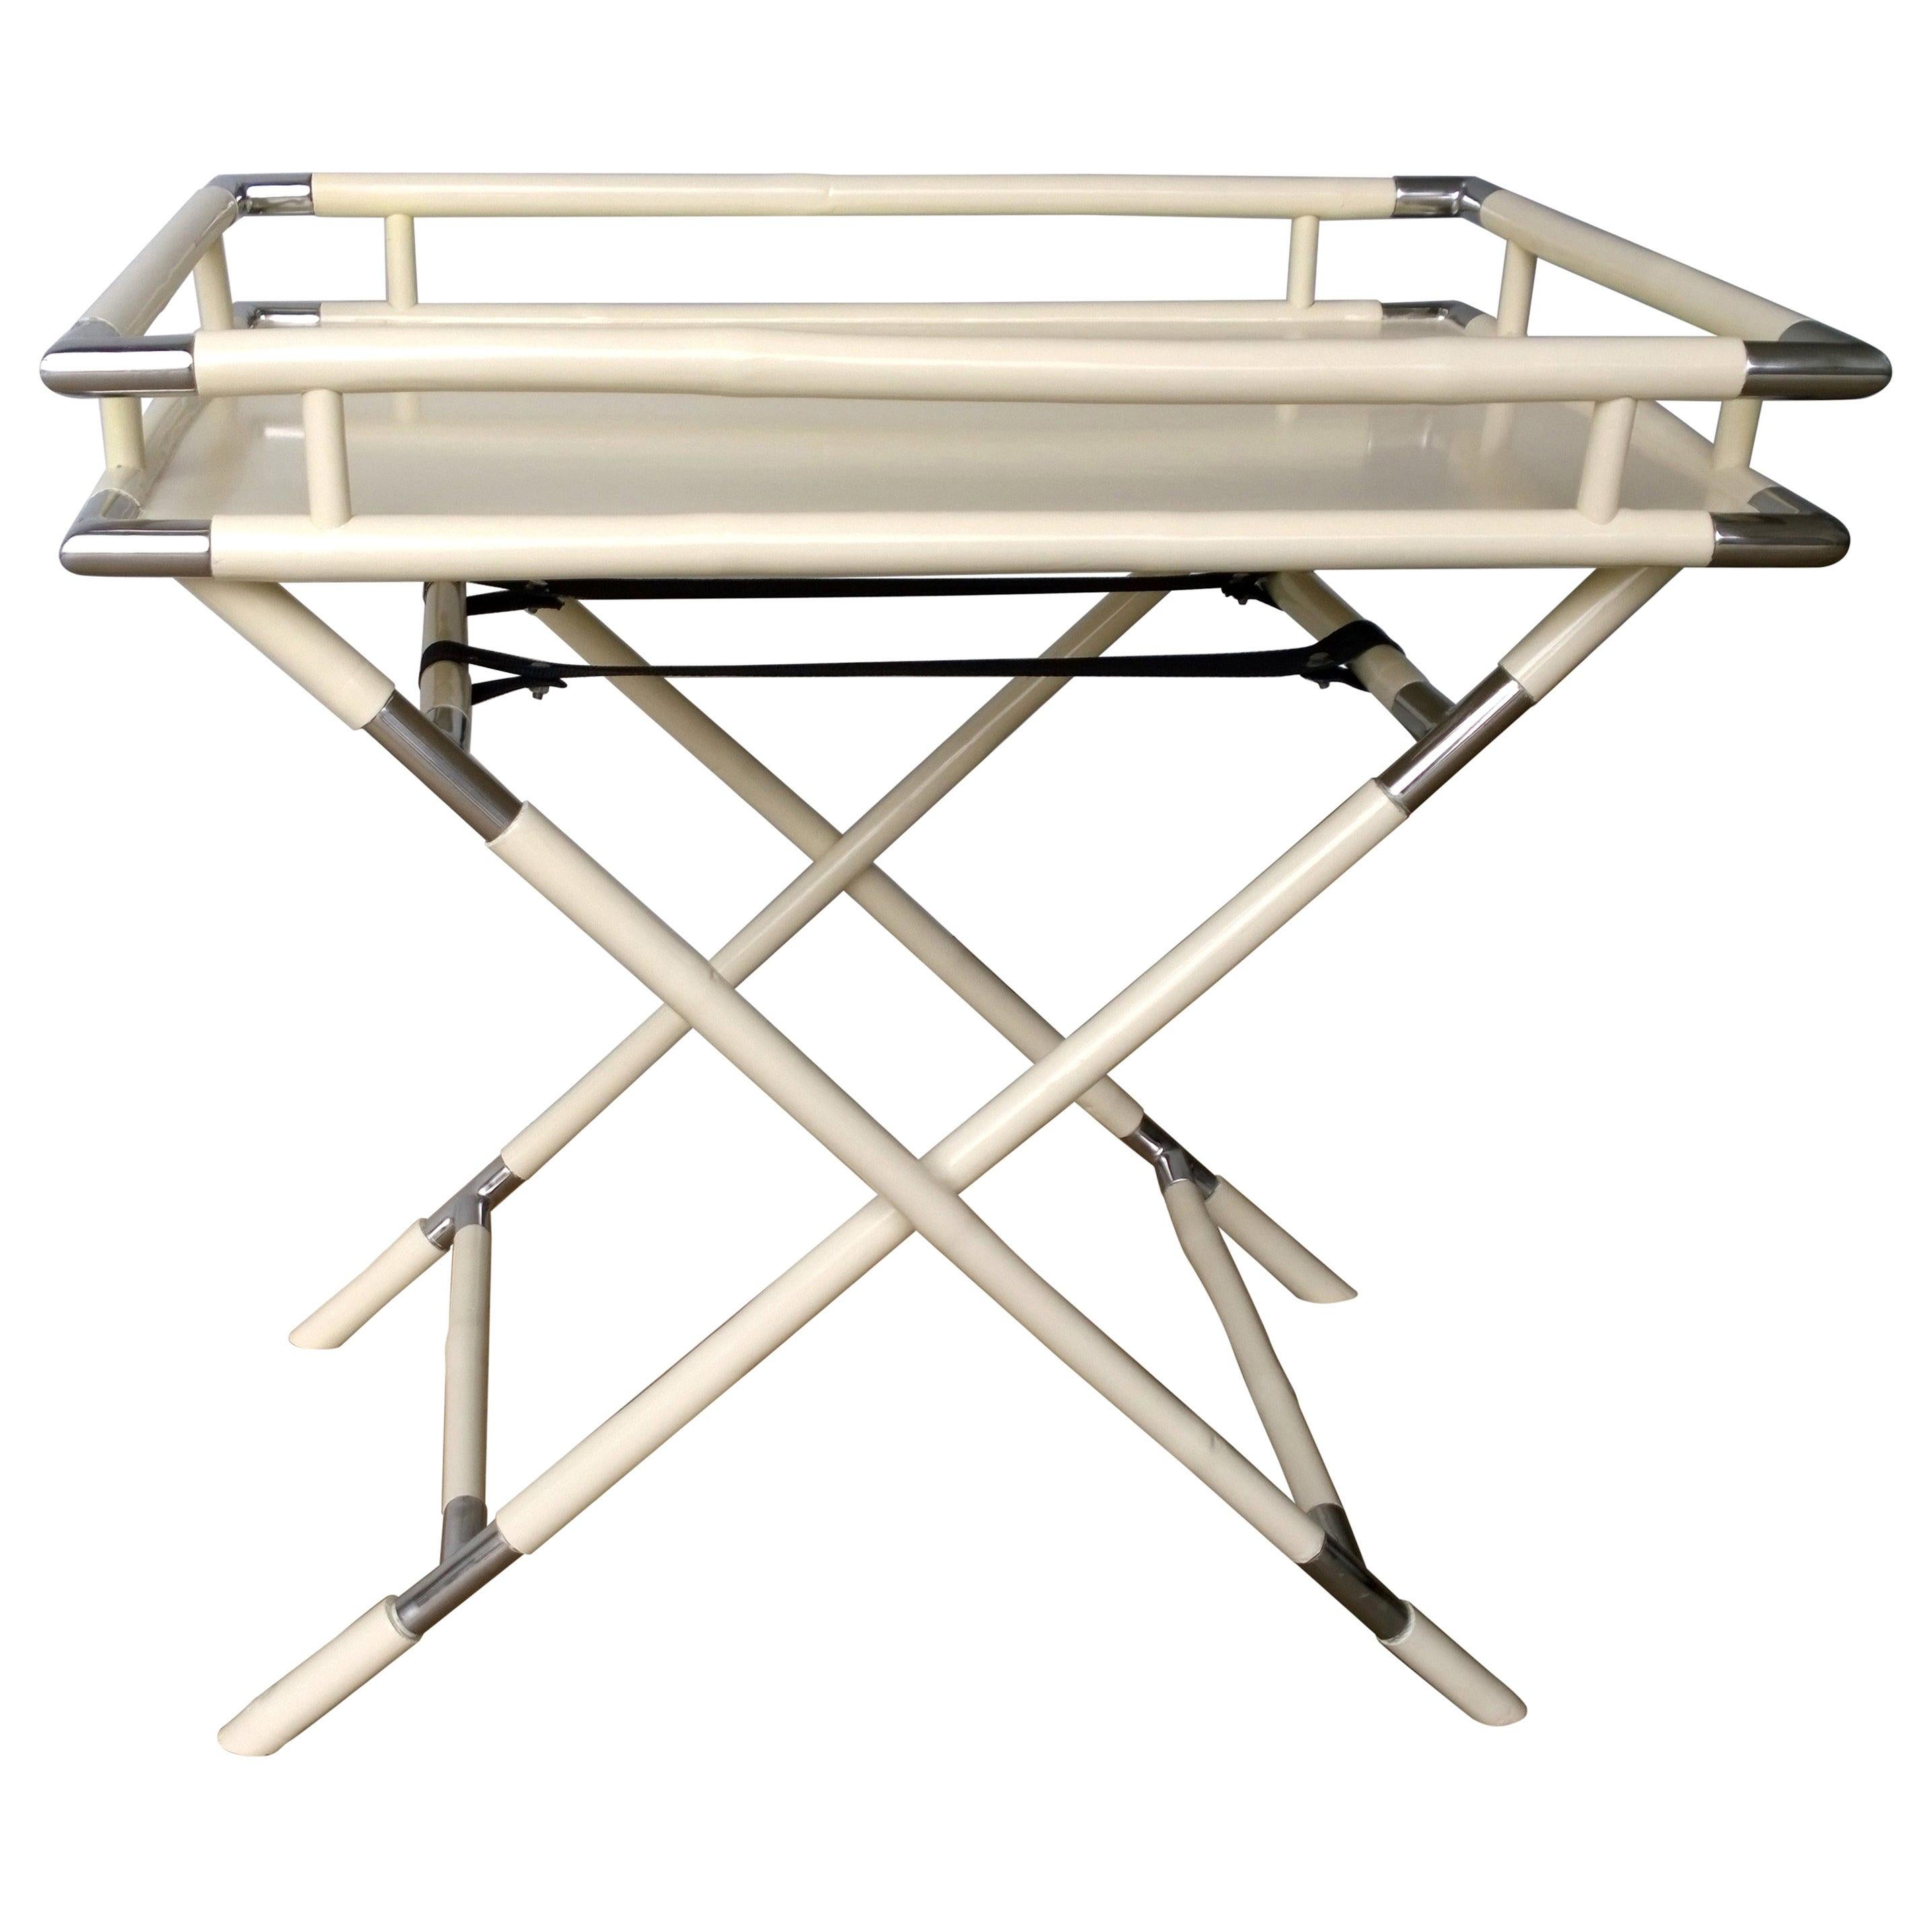 Hand Carved Lacquered Creamy White Bamboo w/ Chrome Accents Tray & Folding Stand For Sale